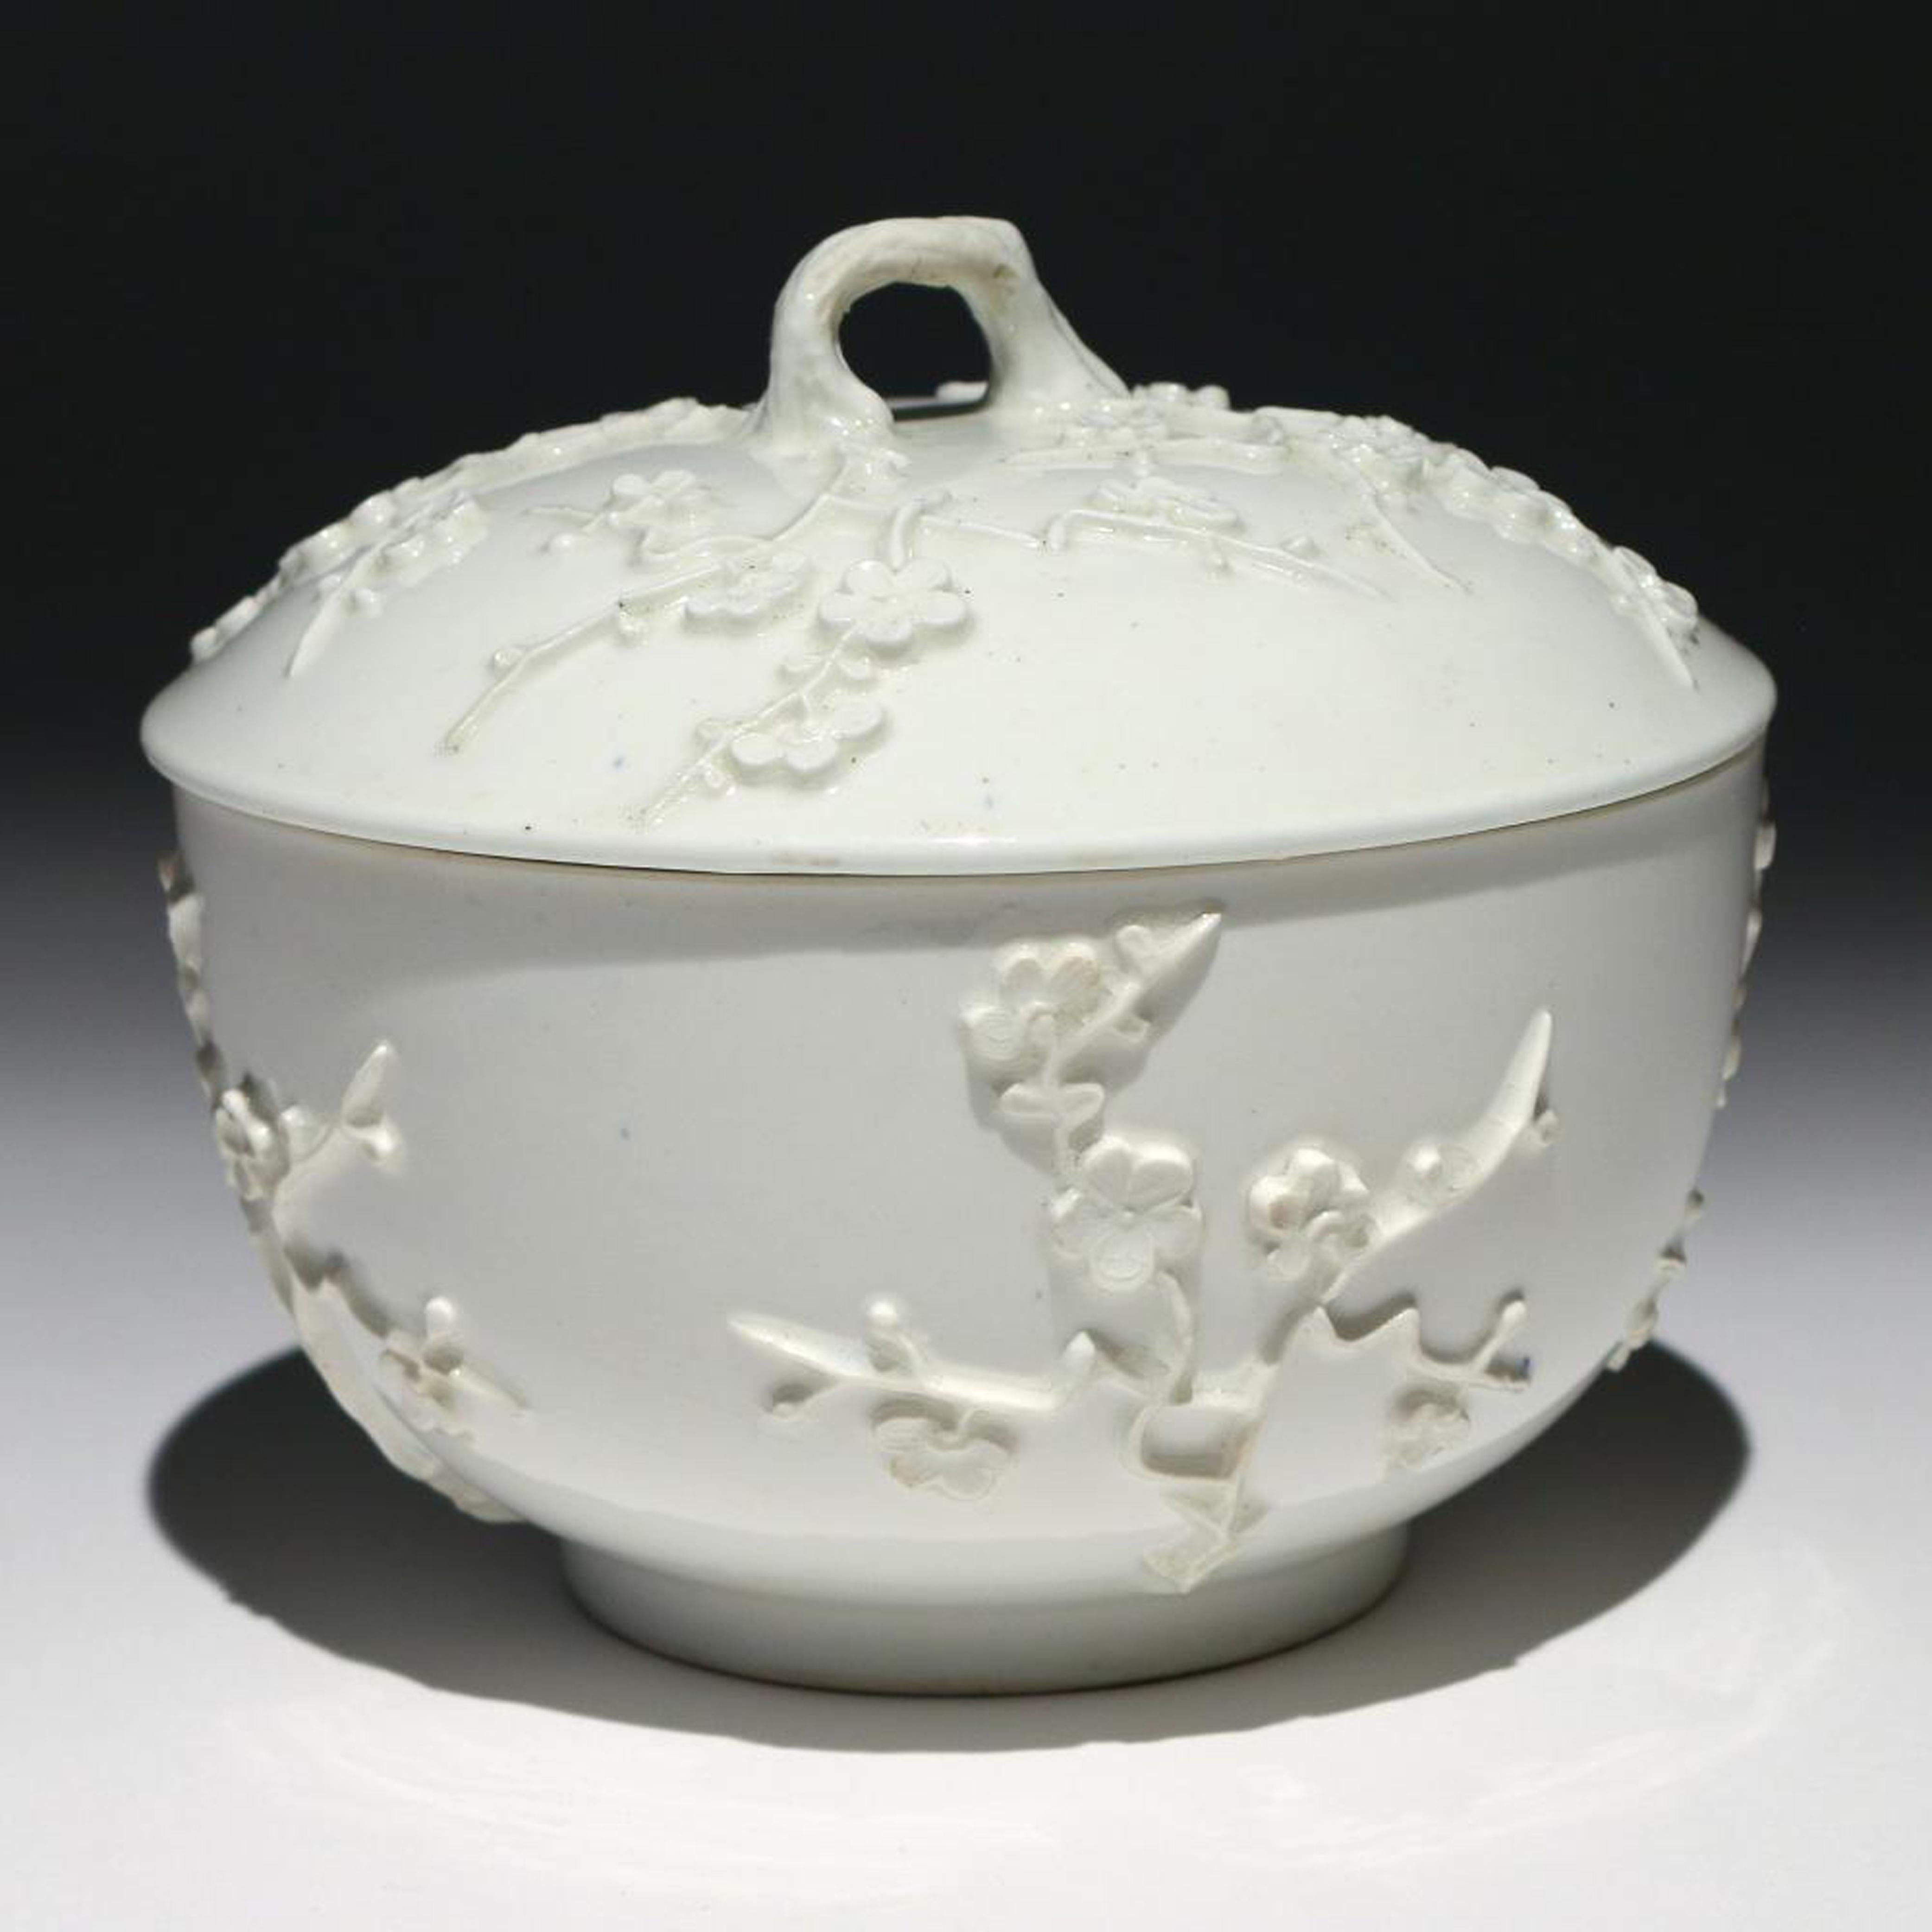 St. Cloud porcelain Prunus covered bowl or tureen and cover, 
French,
circa 1730.
(NY9086)

The circular St. Cloud porcelain covered bowl or tureen is decorated with a prunus decoration in relief after the Chinese.

Dimensions: 5 inches high